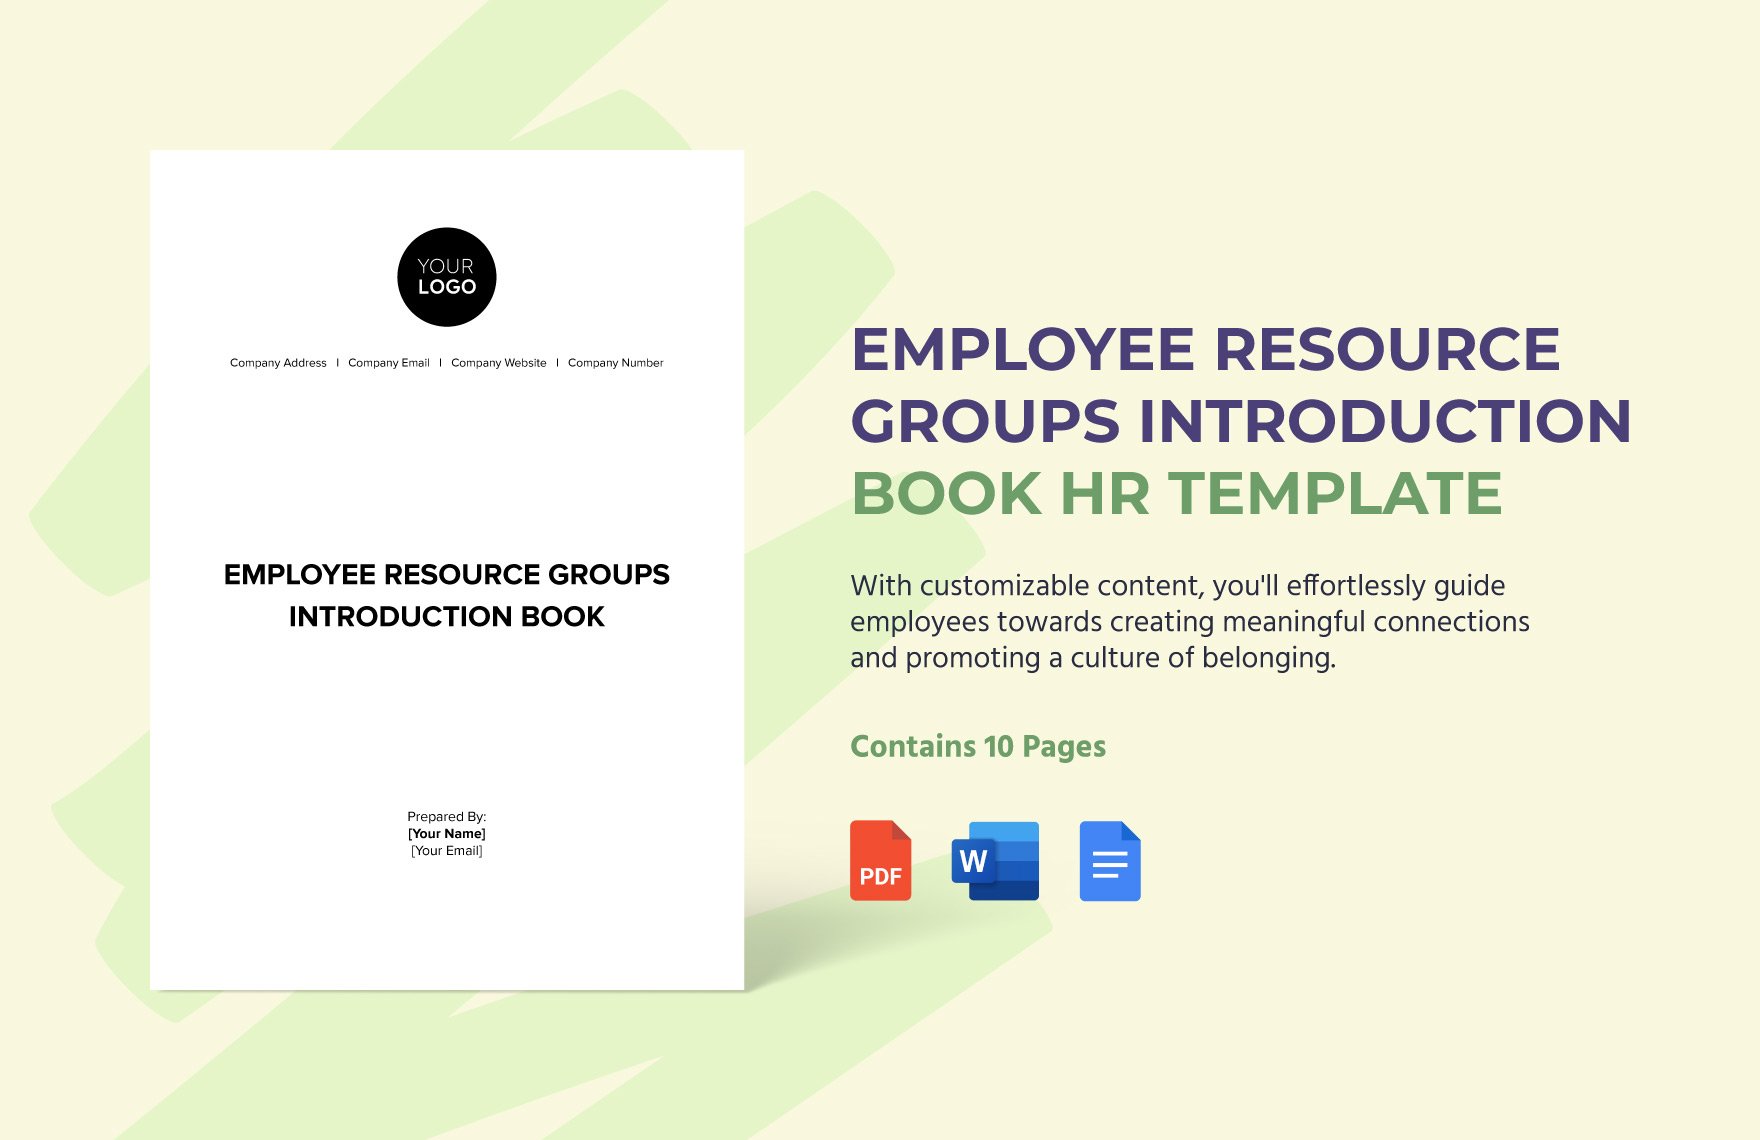 Employee Resource Groups Introduction Book HR Template in Word, Google Docs, PDF